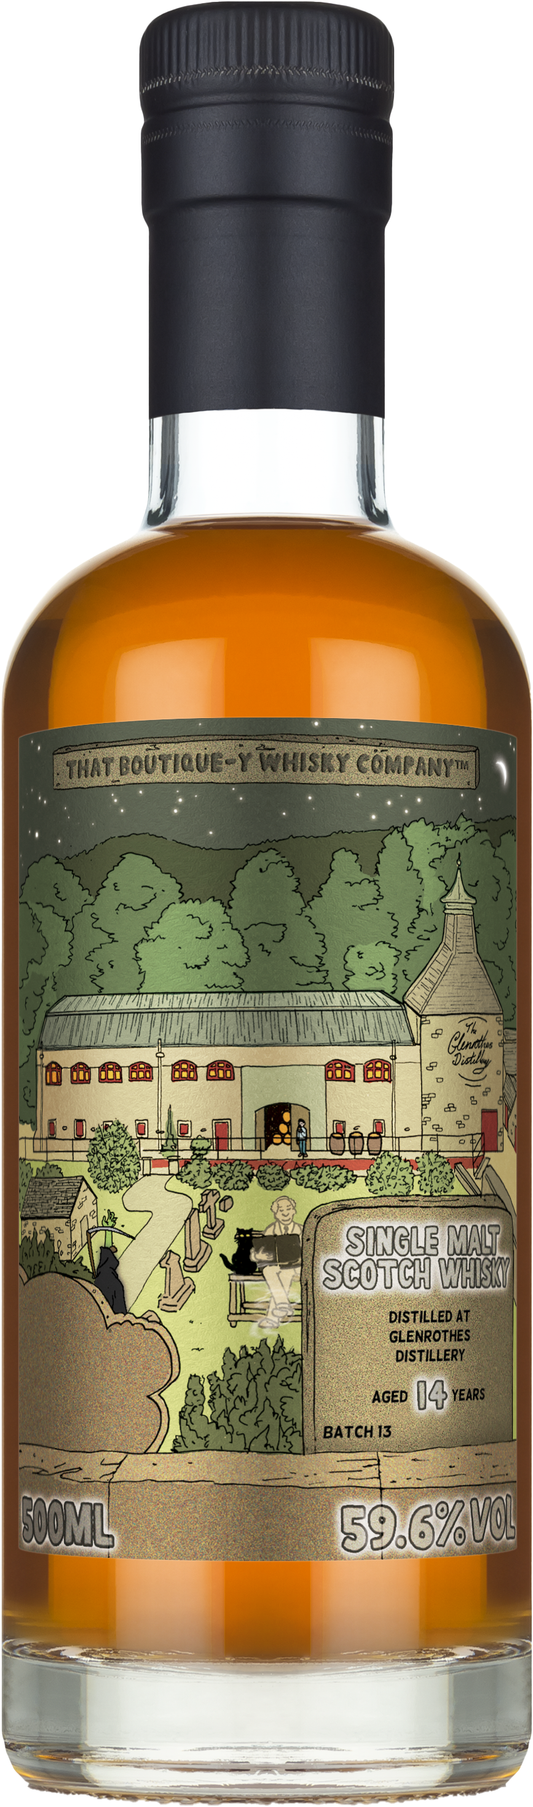 That Boutique-Y Whisky Company Glenrothes 14 Year Batch 13 Single Malt Scotch Whisky 500ml